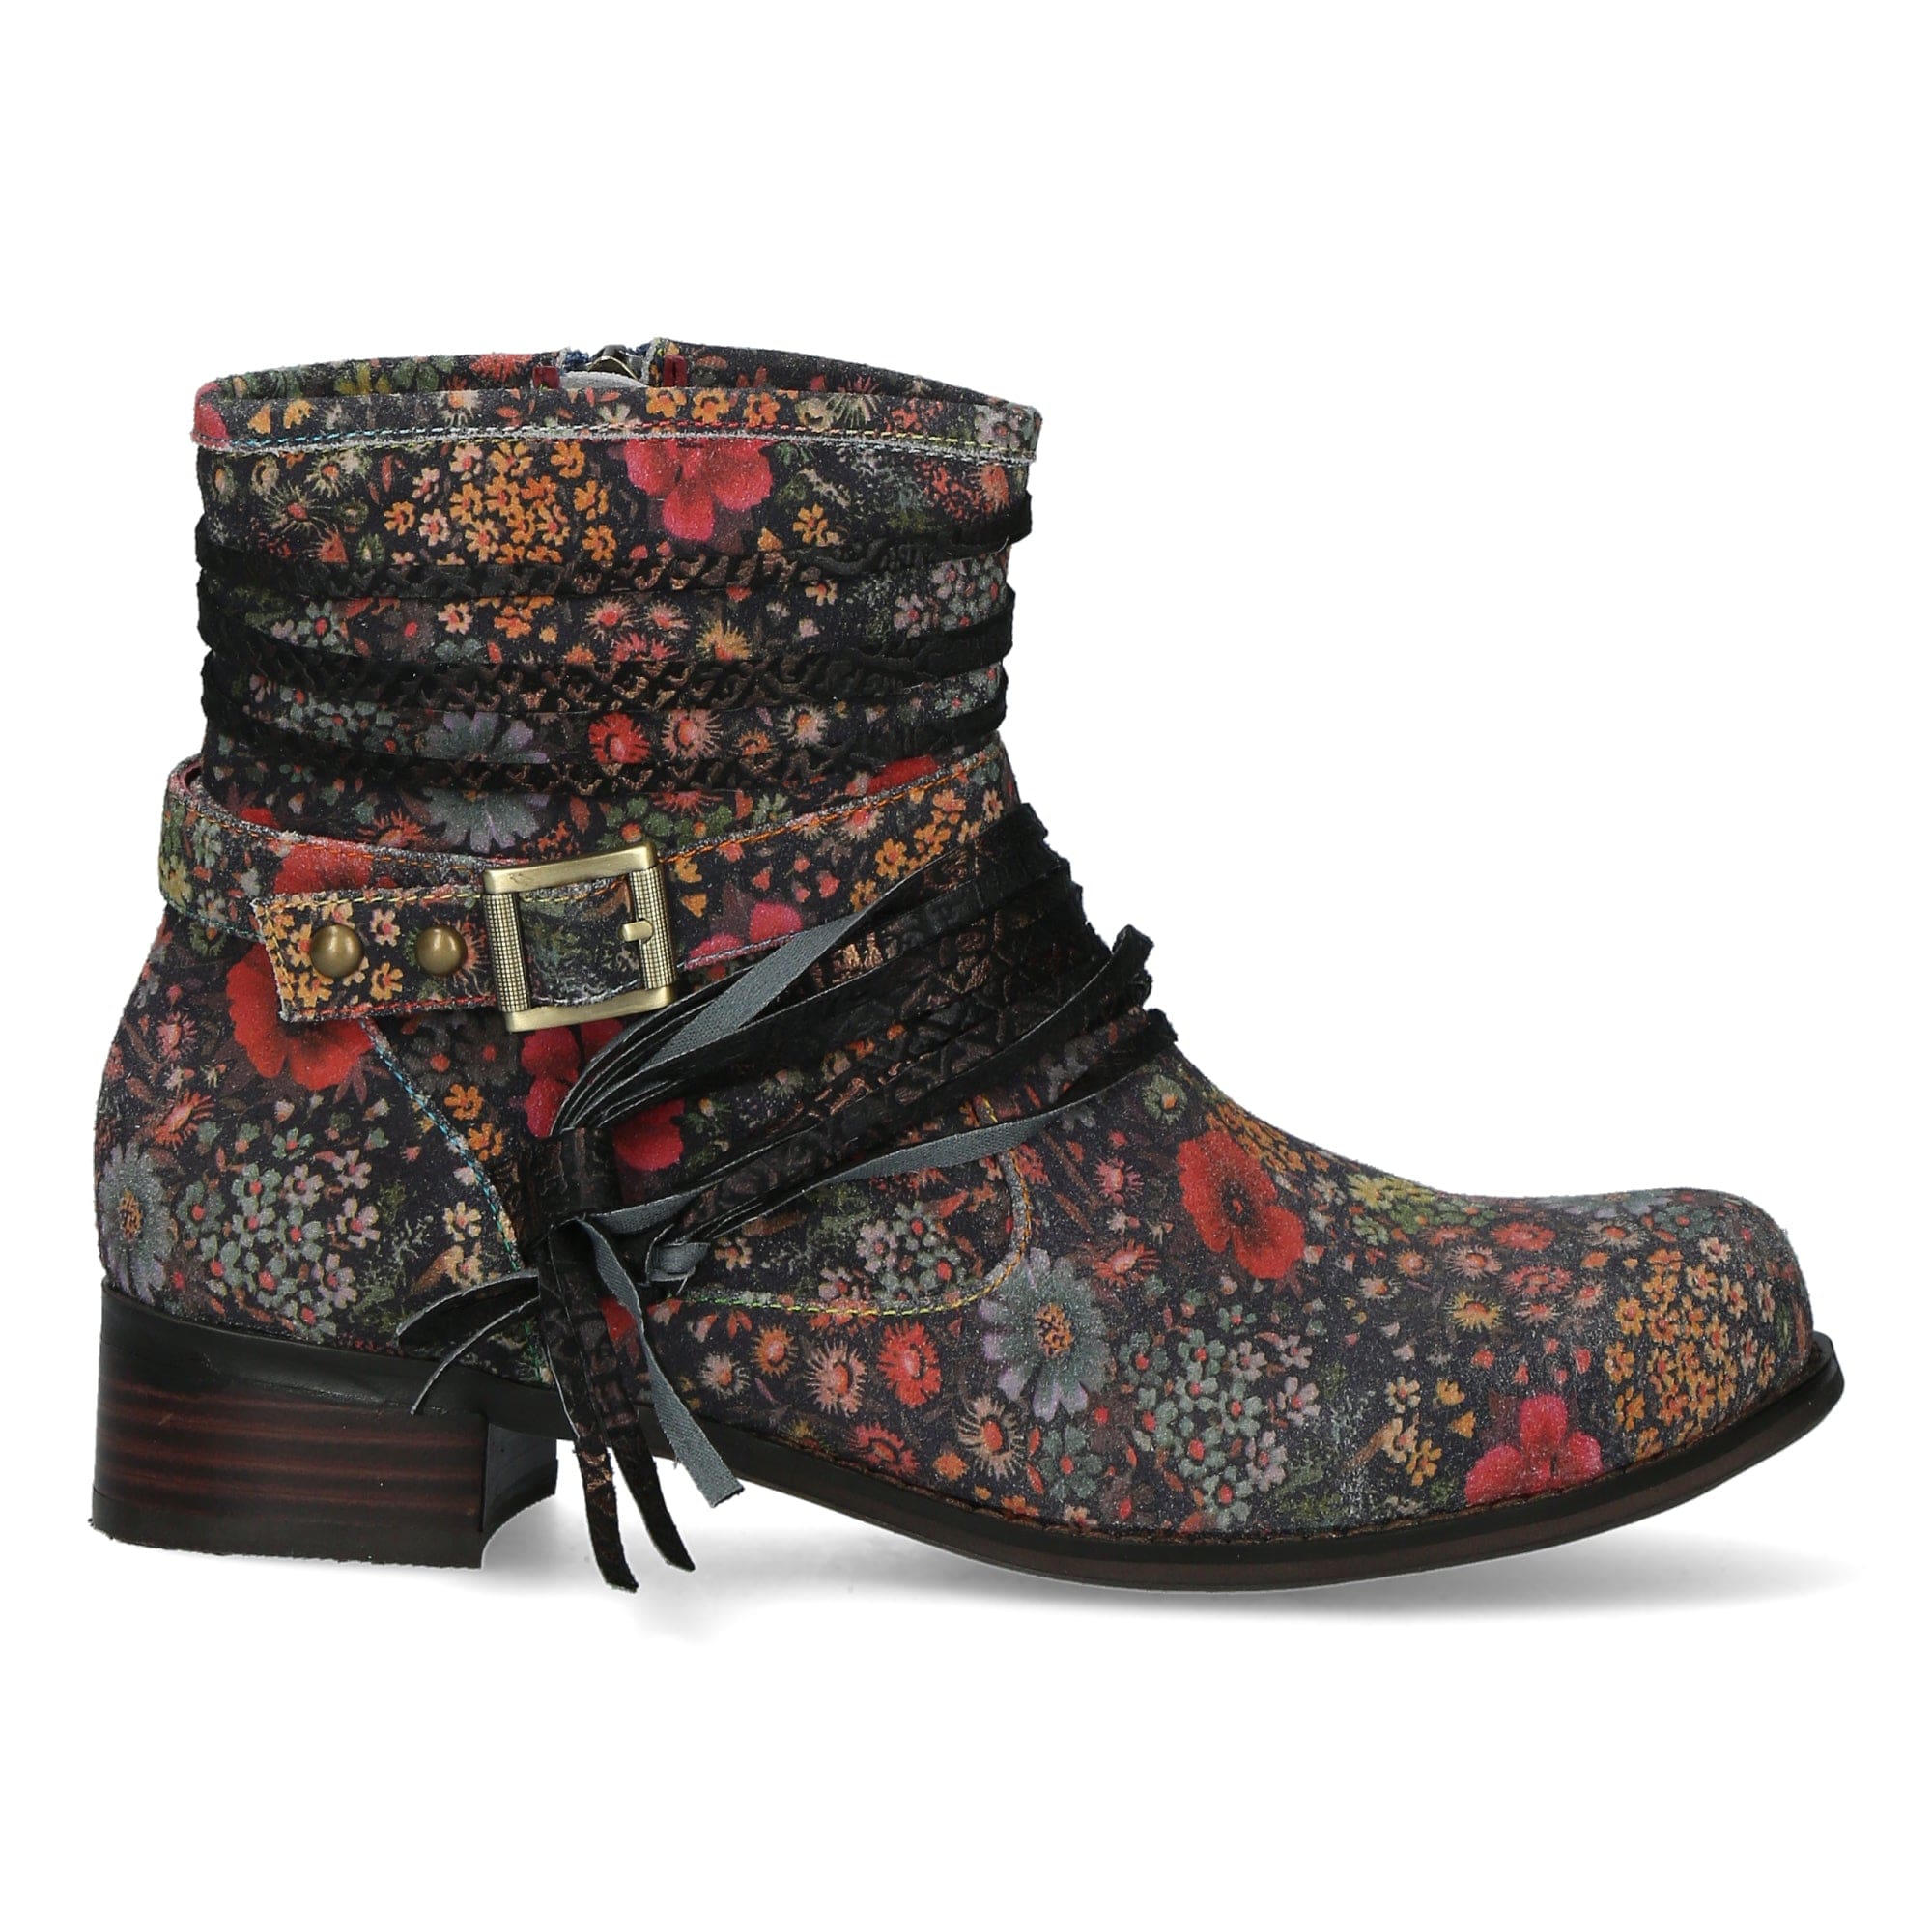 COLOMBE 02 shoes - 35 / Multi - Boots